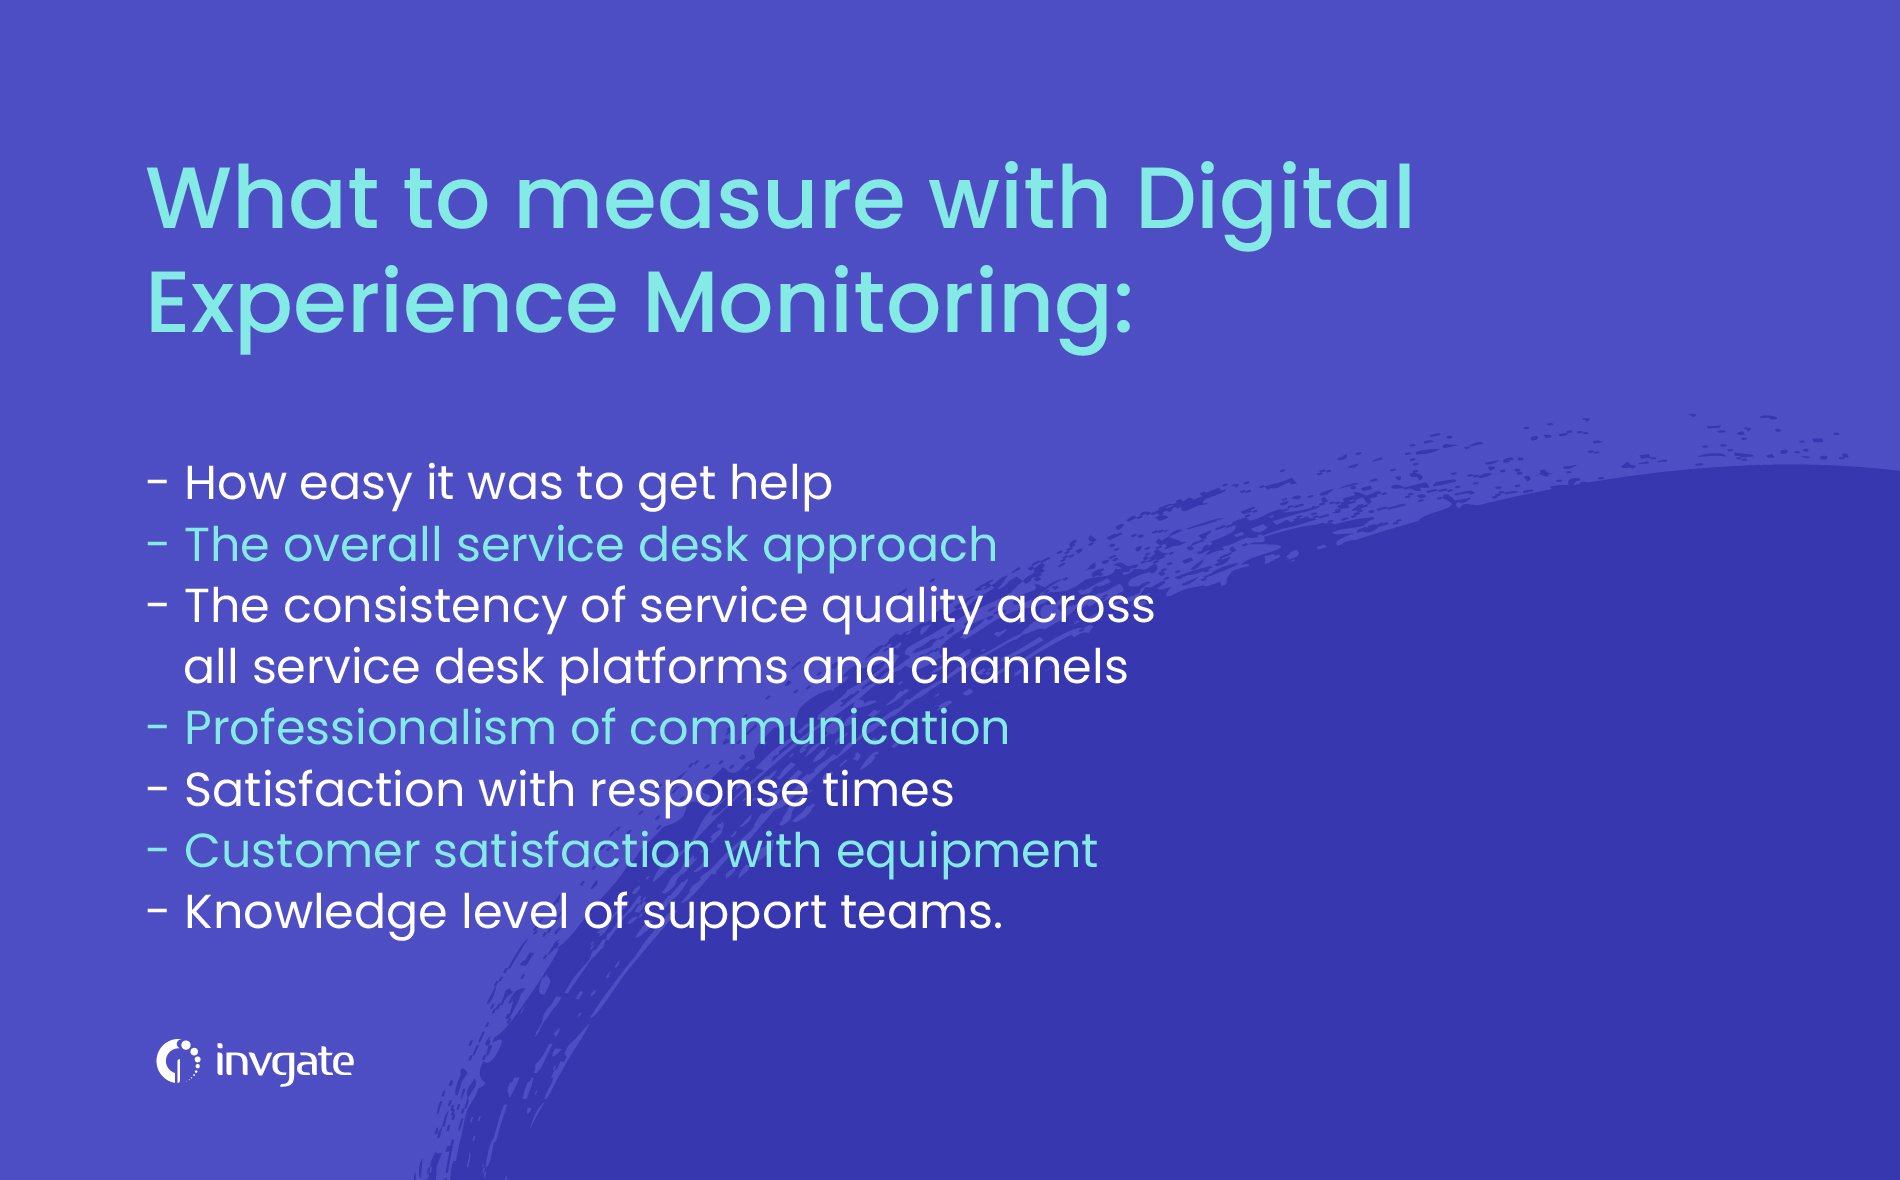 What to measure with digital experience monitoring